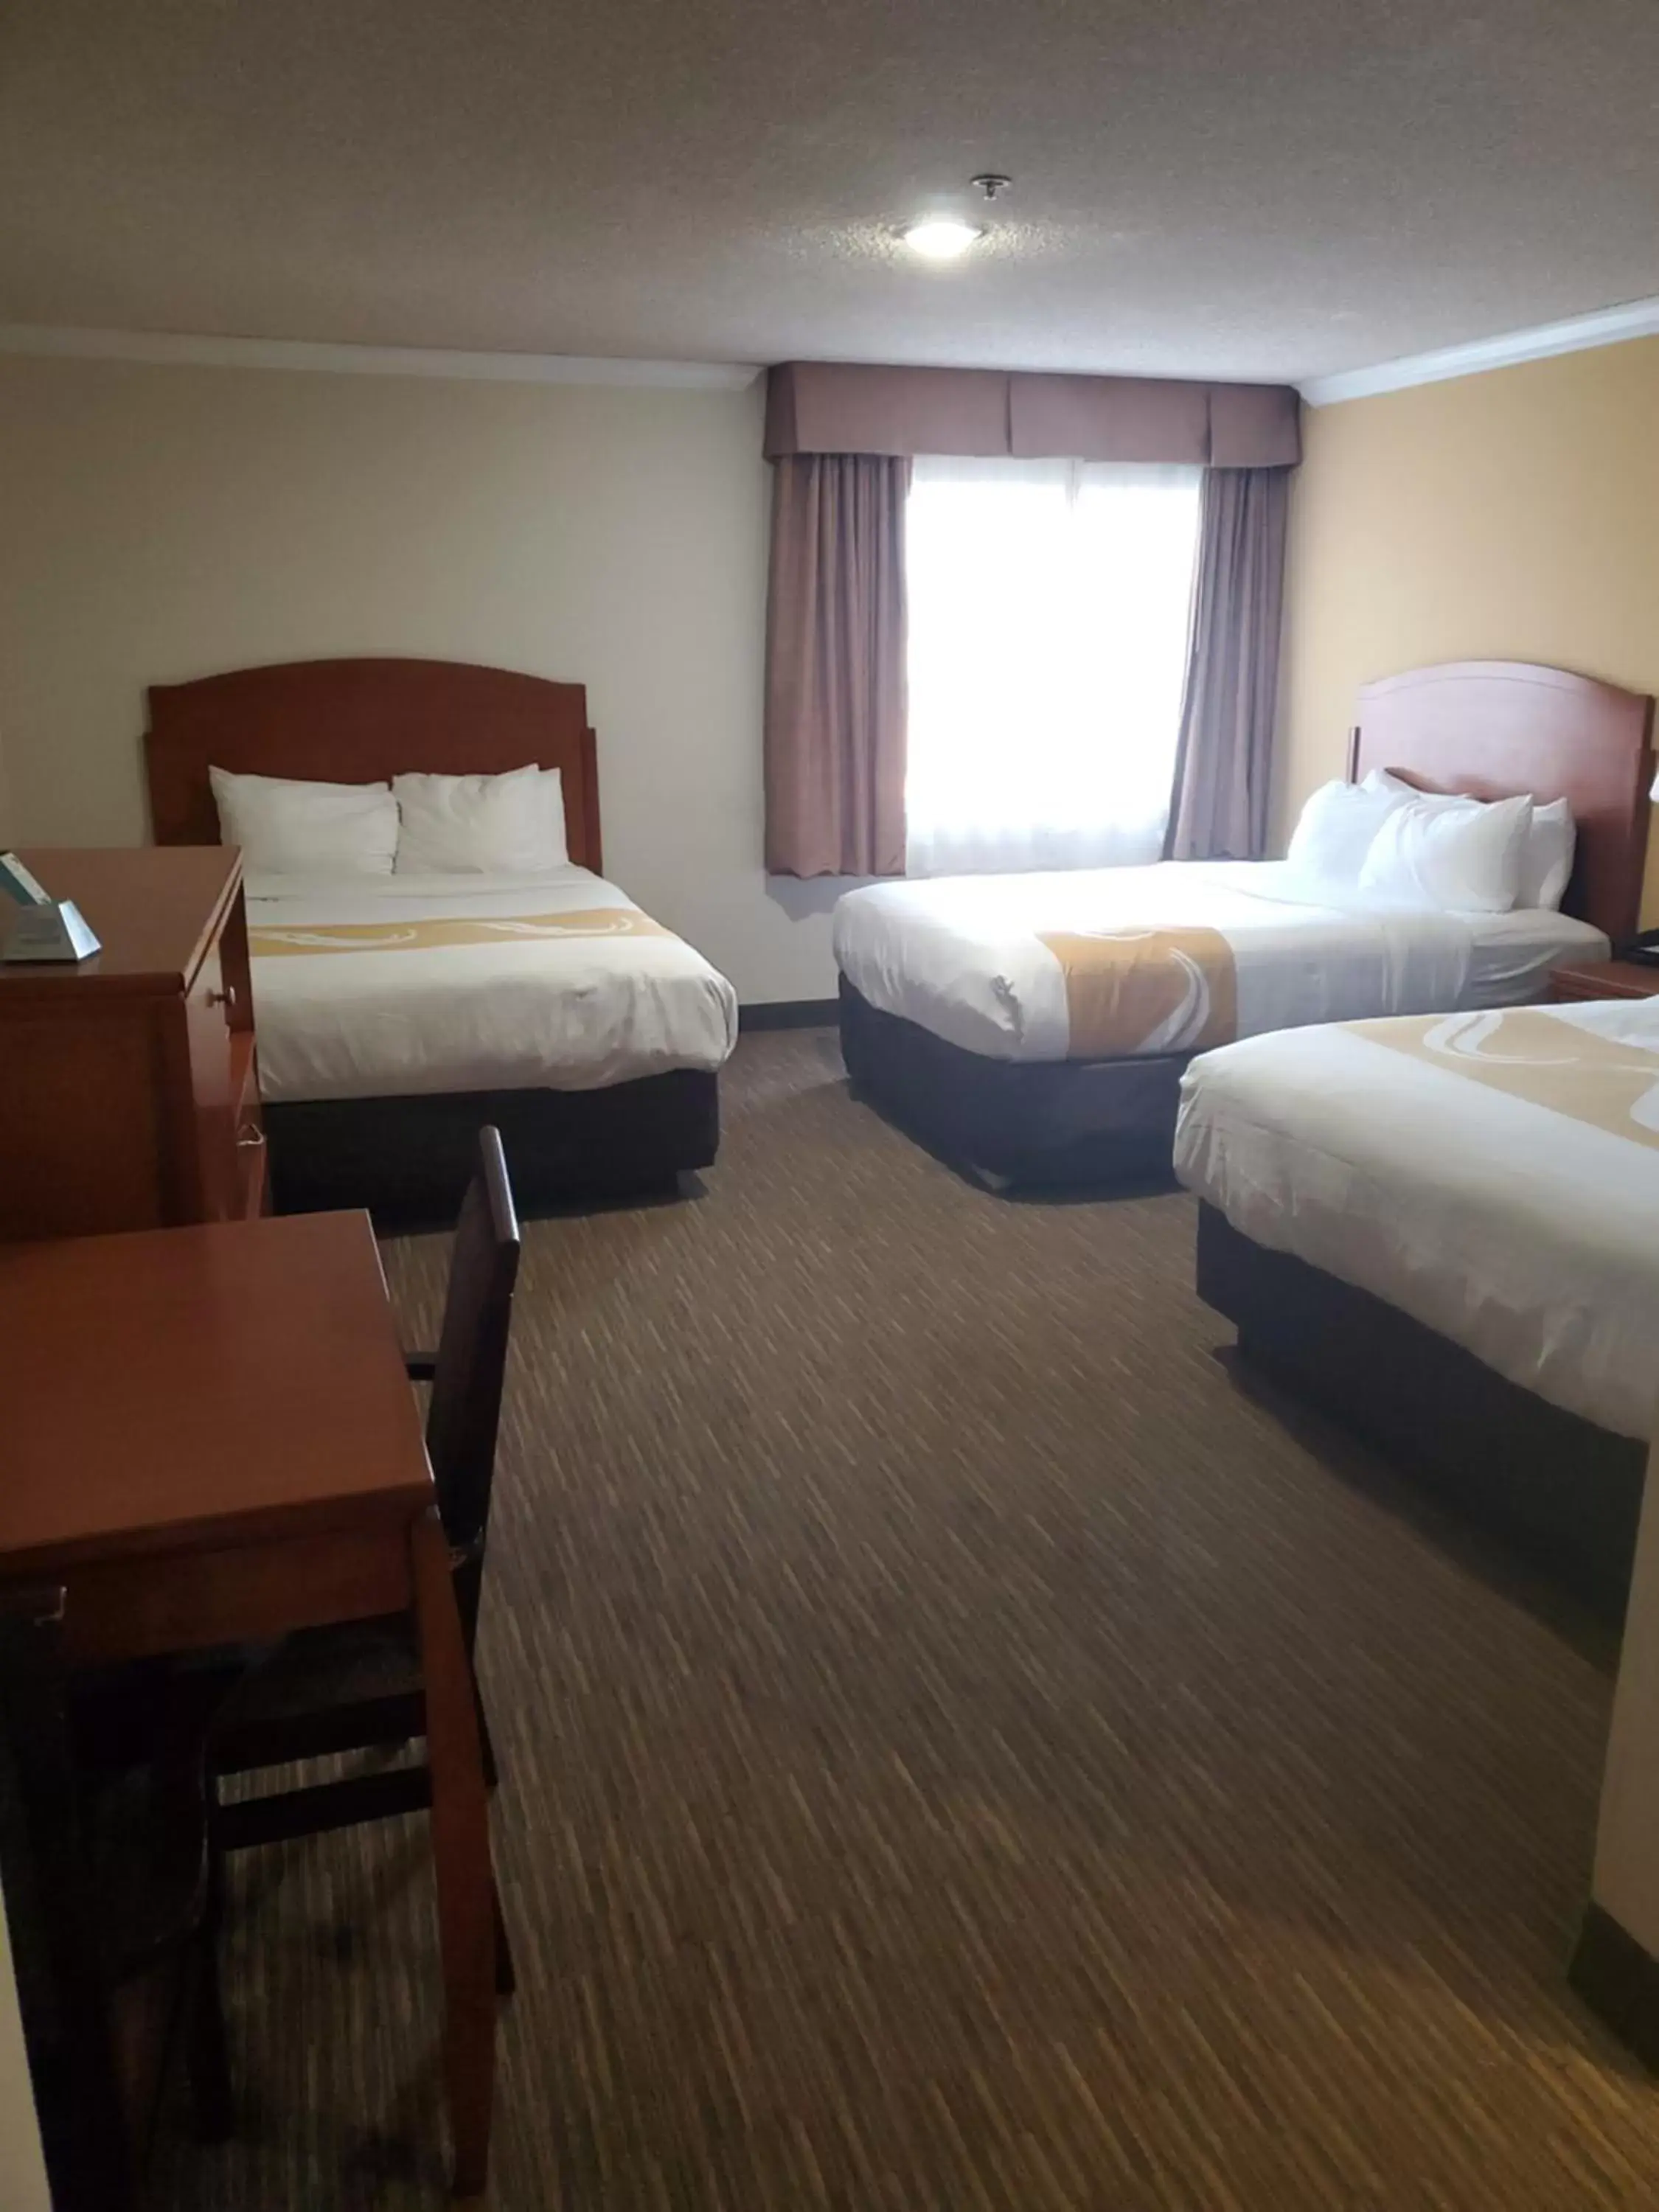 Bedroom, Bed in Quality Inn & Suites Los Angeles Airport - LAX